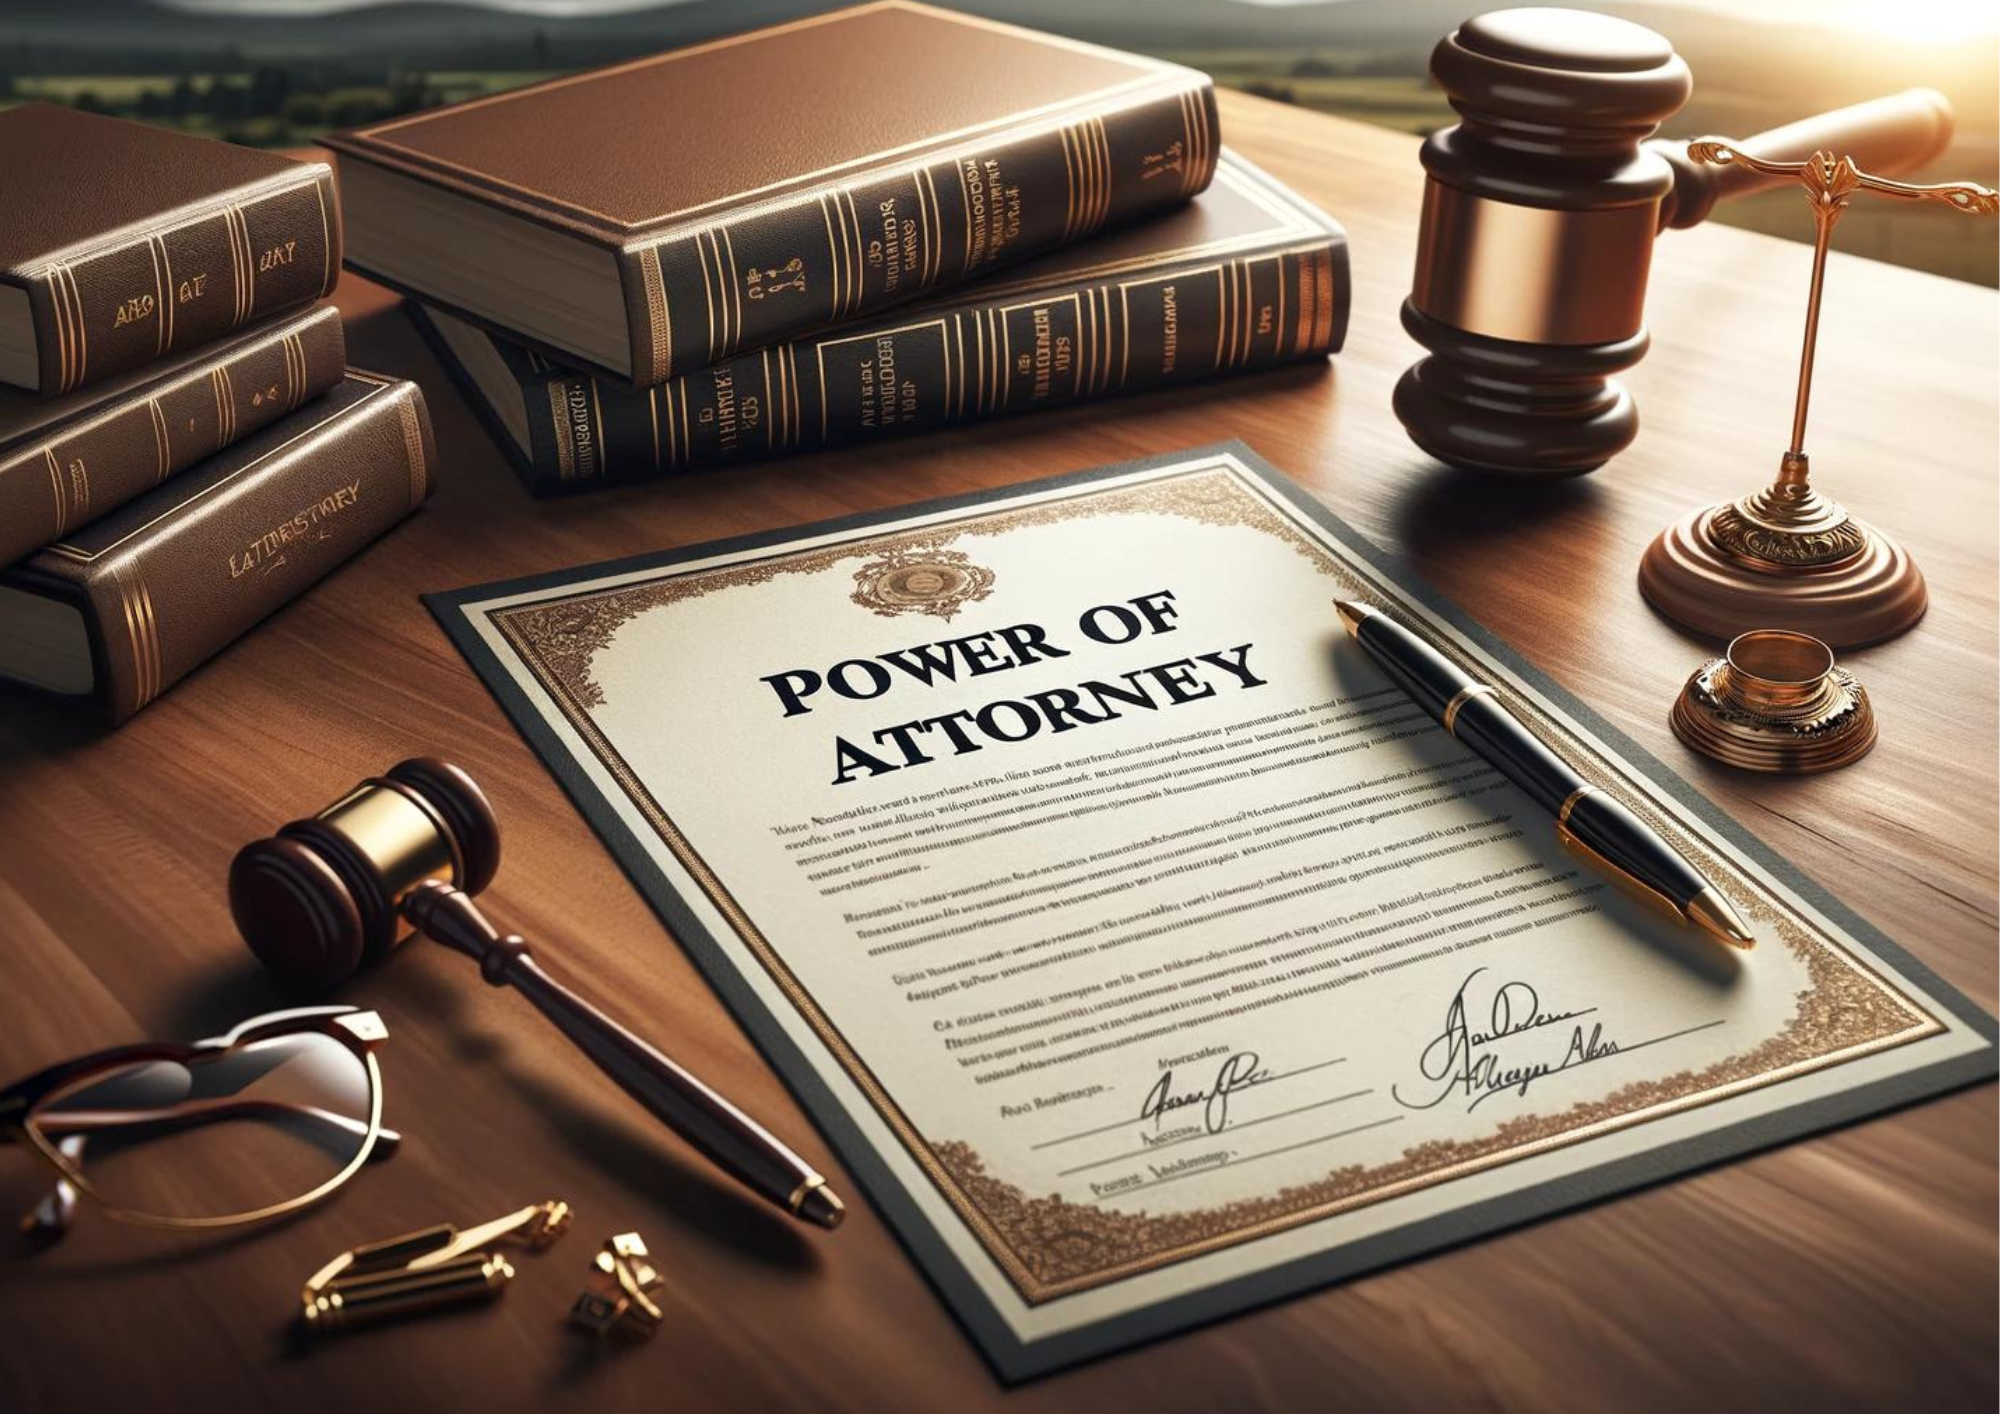 Power of Attorney (POA) Forms Template